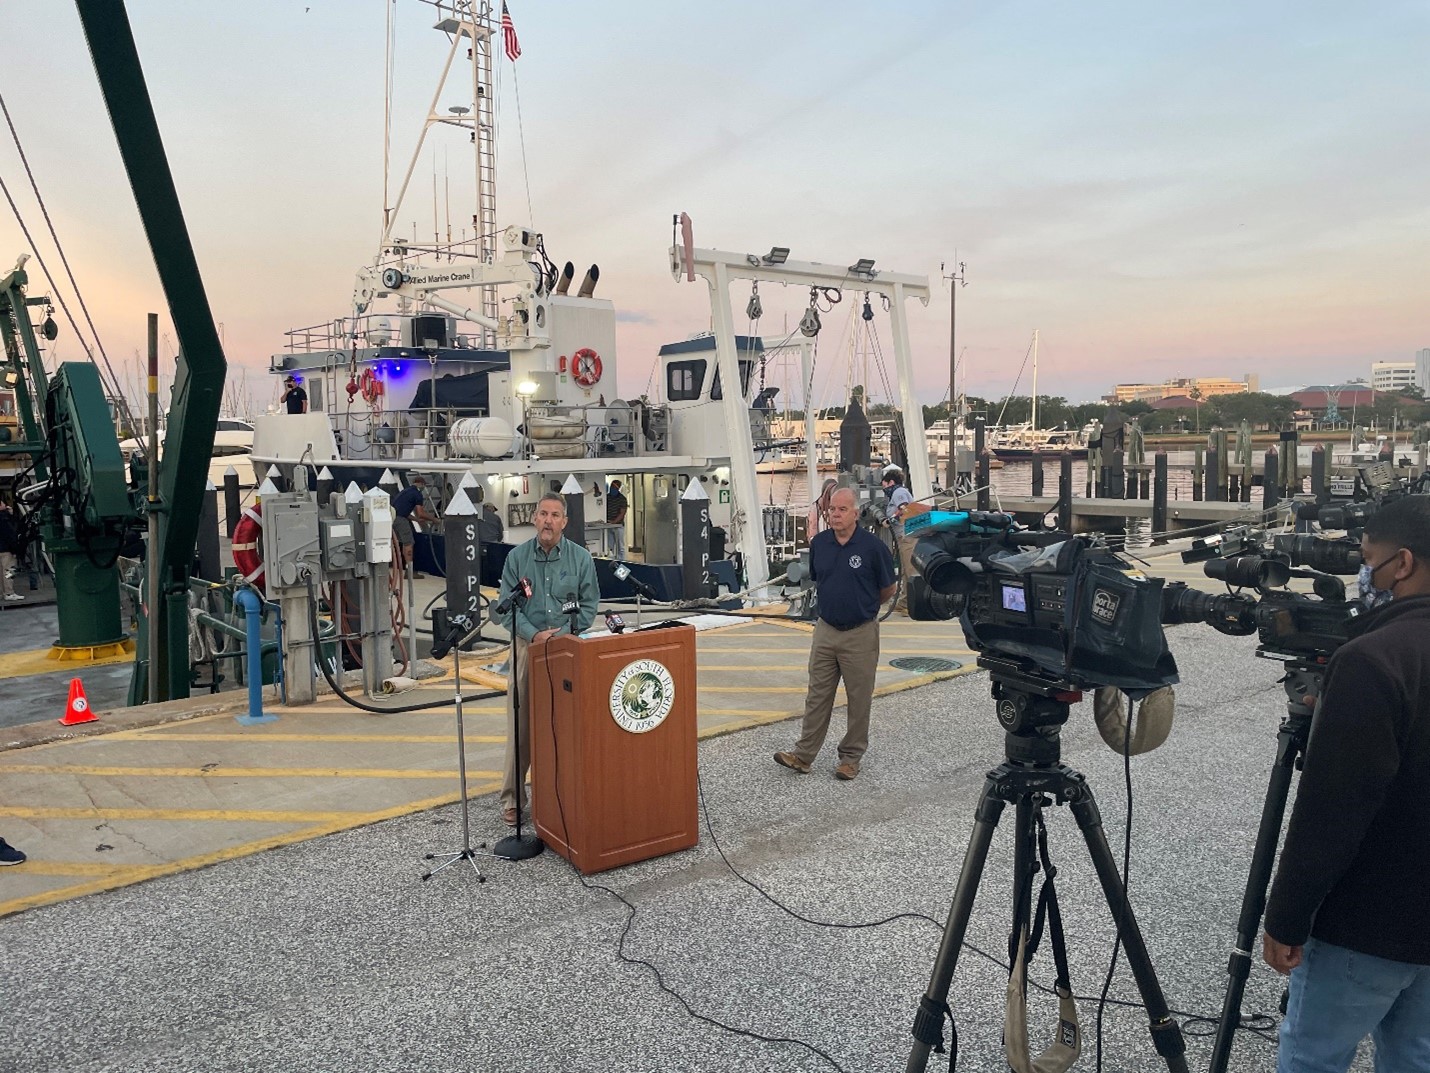 Tom Frazer, dean of the USF College of Marine Science, and Monty Graham, Director of FIO, spoke at a press event held before the R/V Weatherbird departed on the first research sampling effort in response to Piney Point.